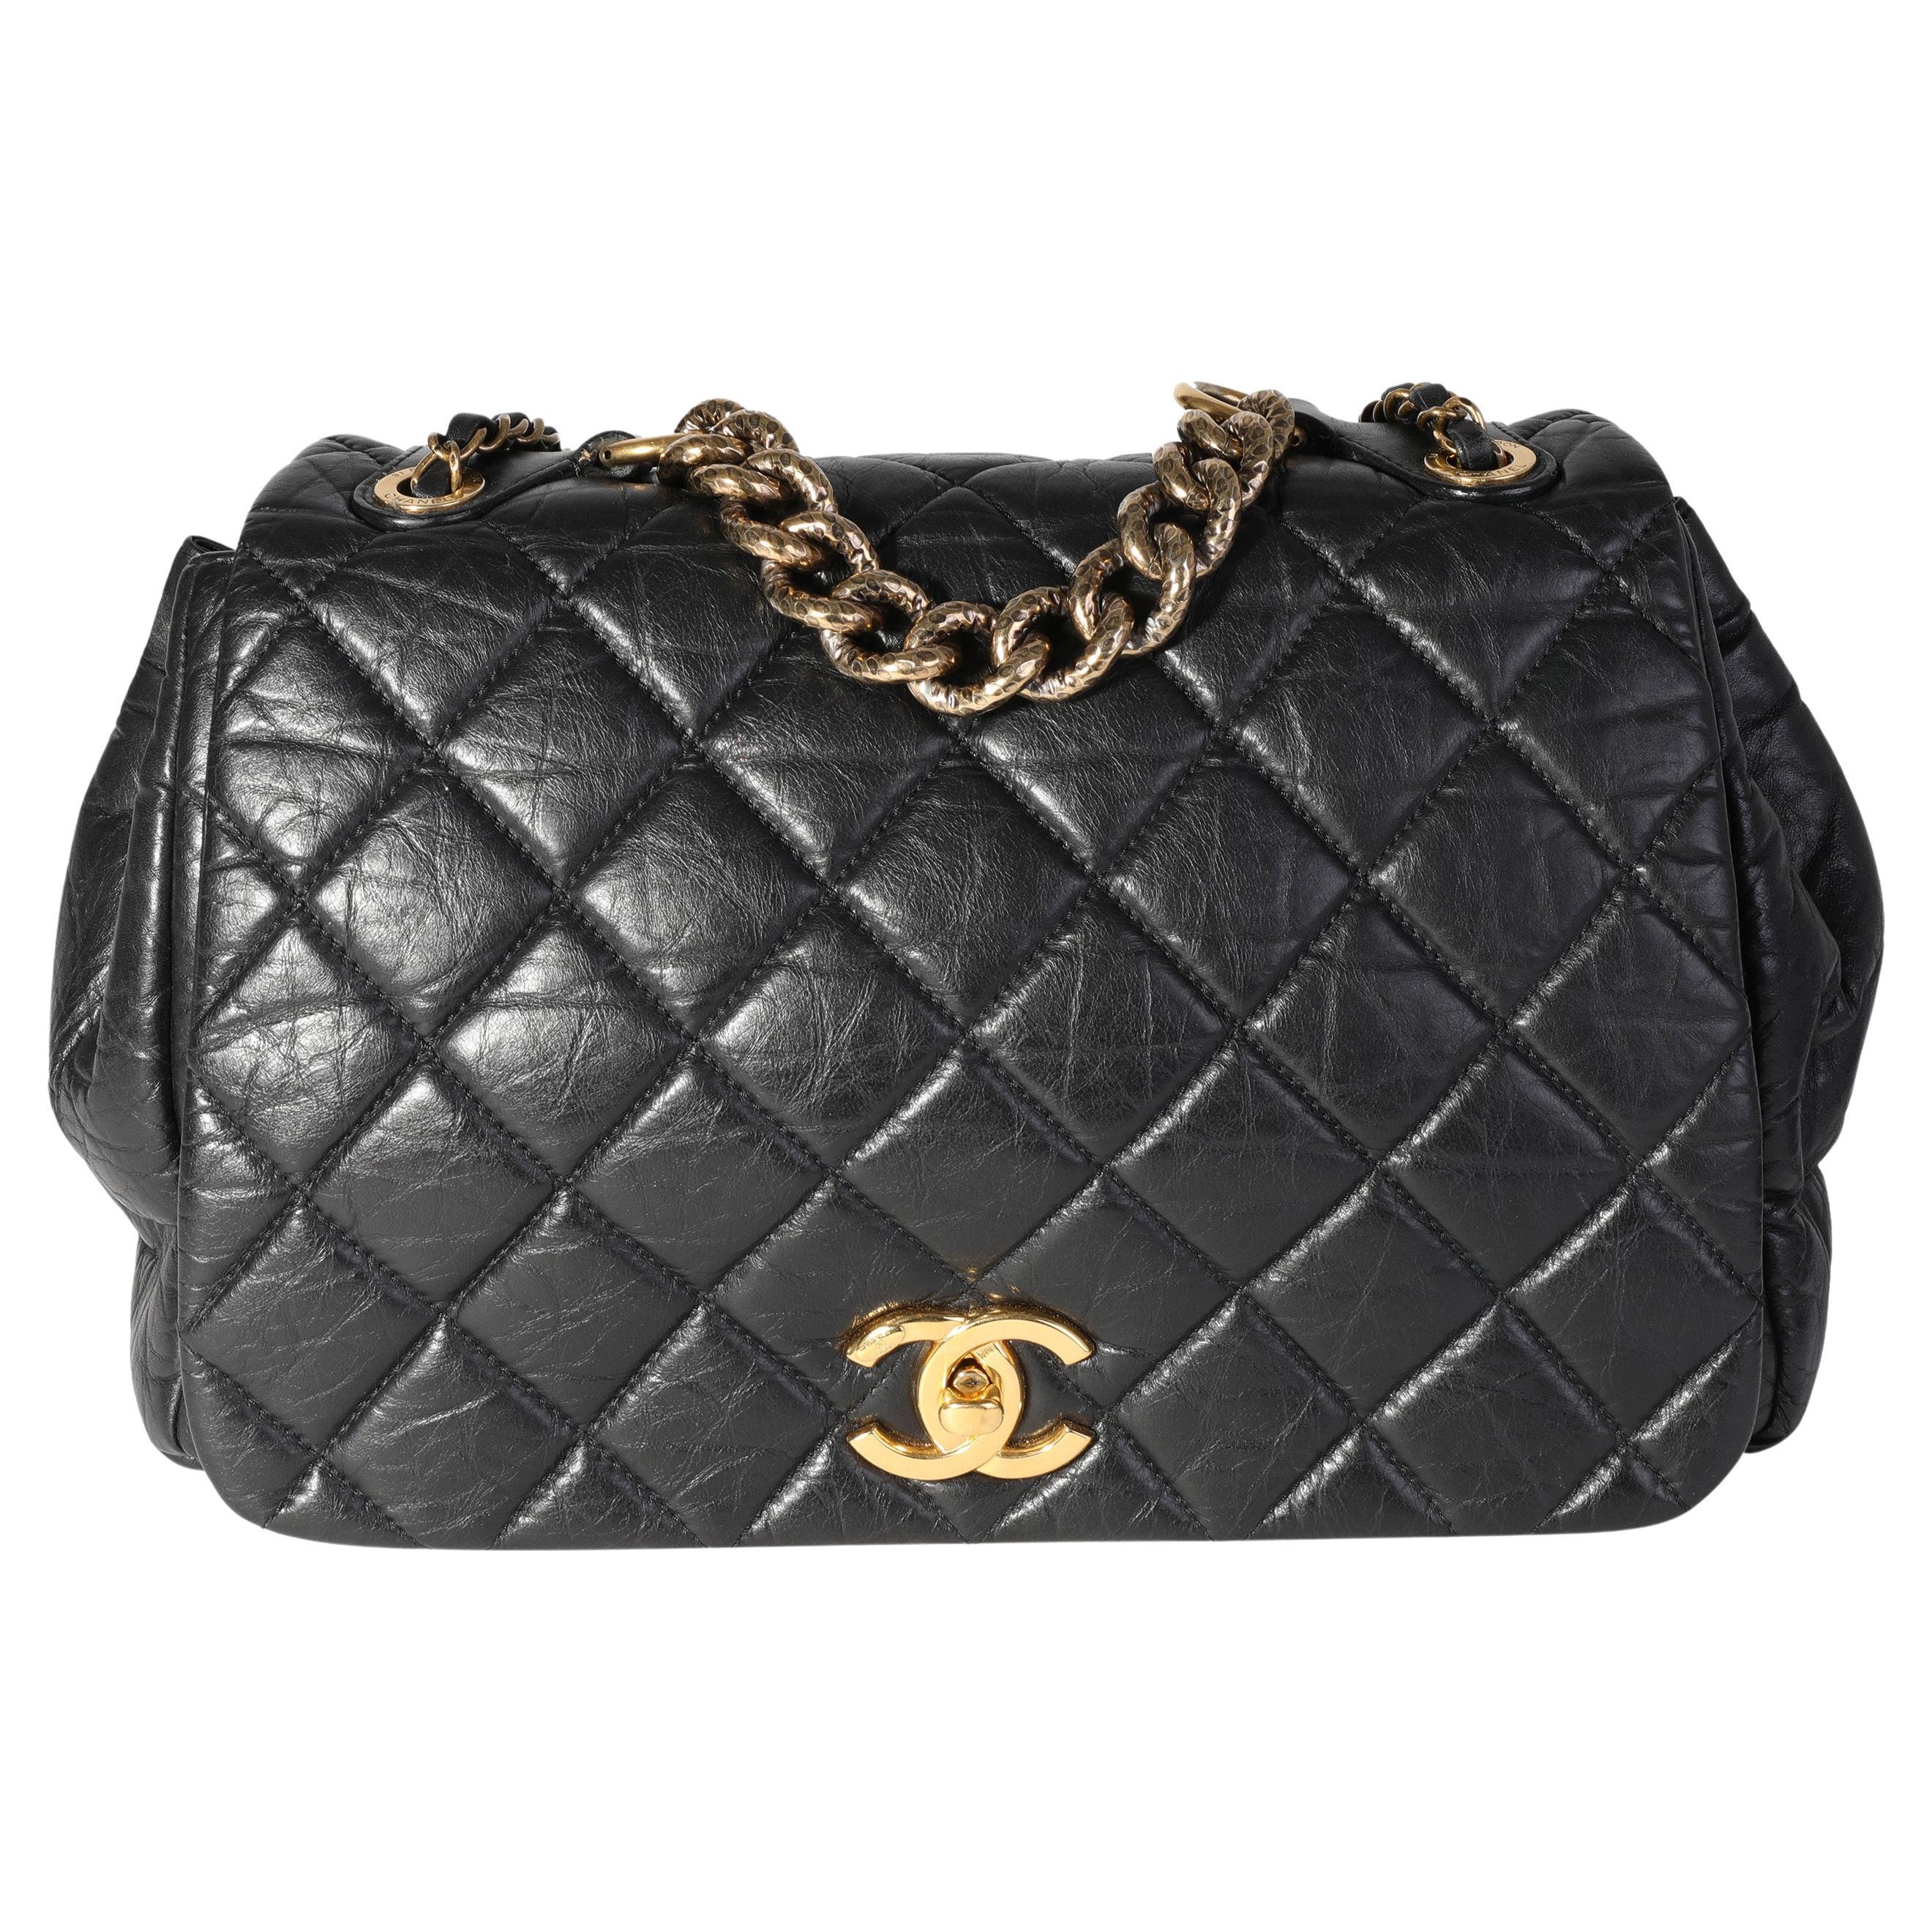 Chanel Black Large Chain Around Rounded Classic Flap Cross Body